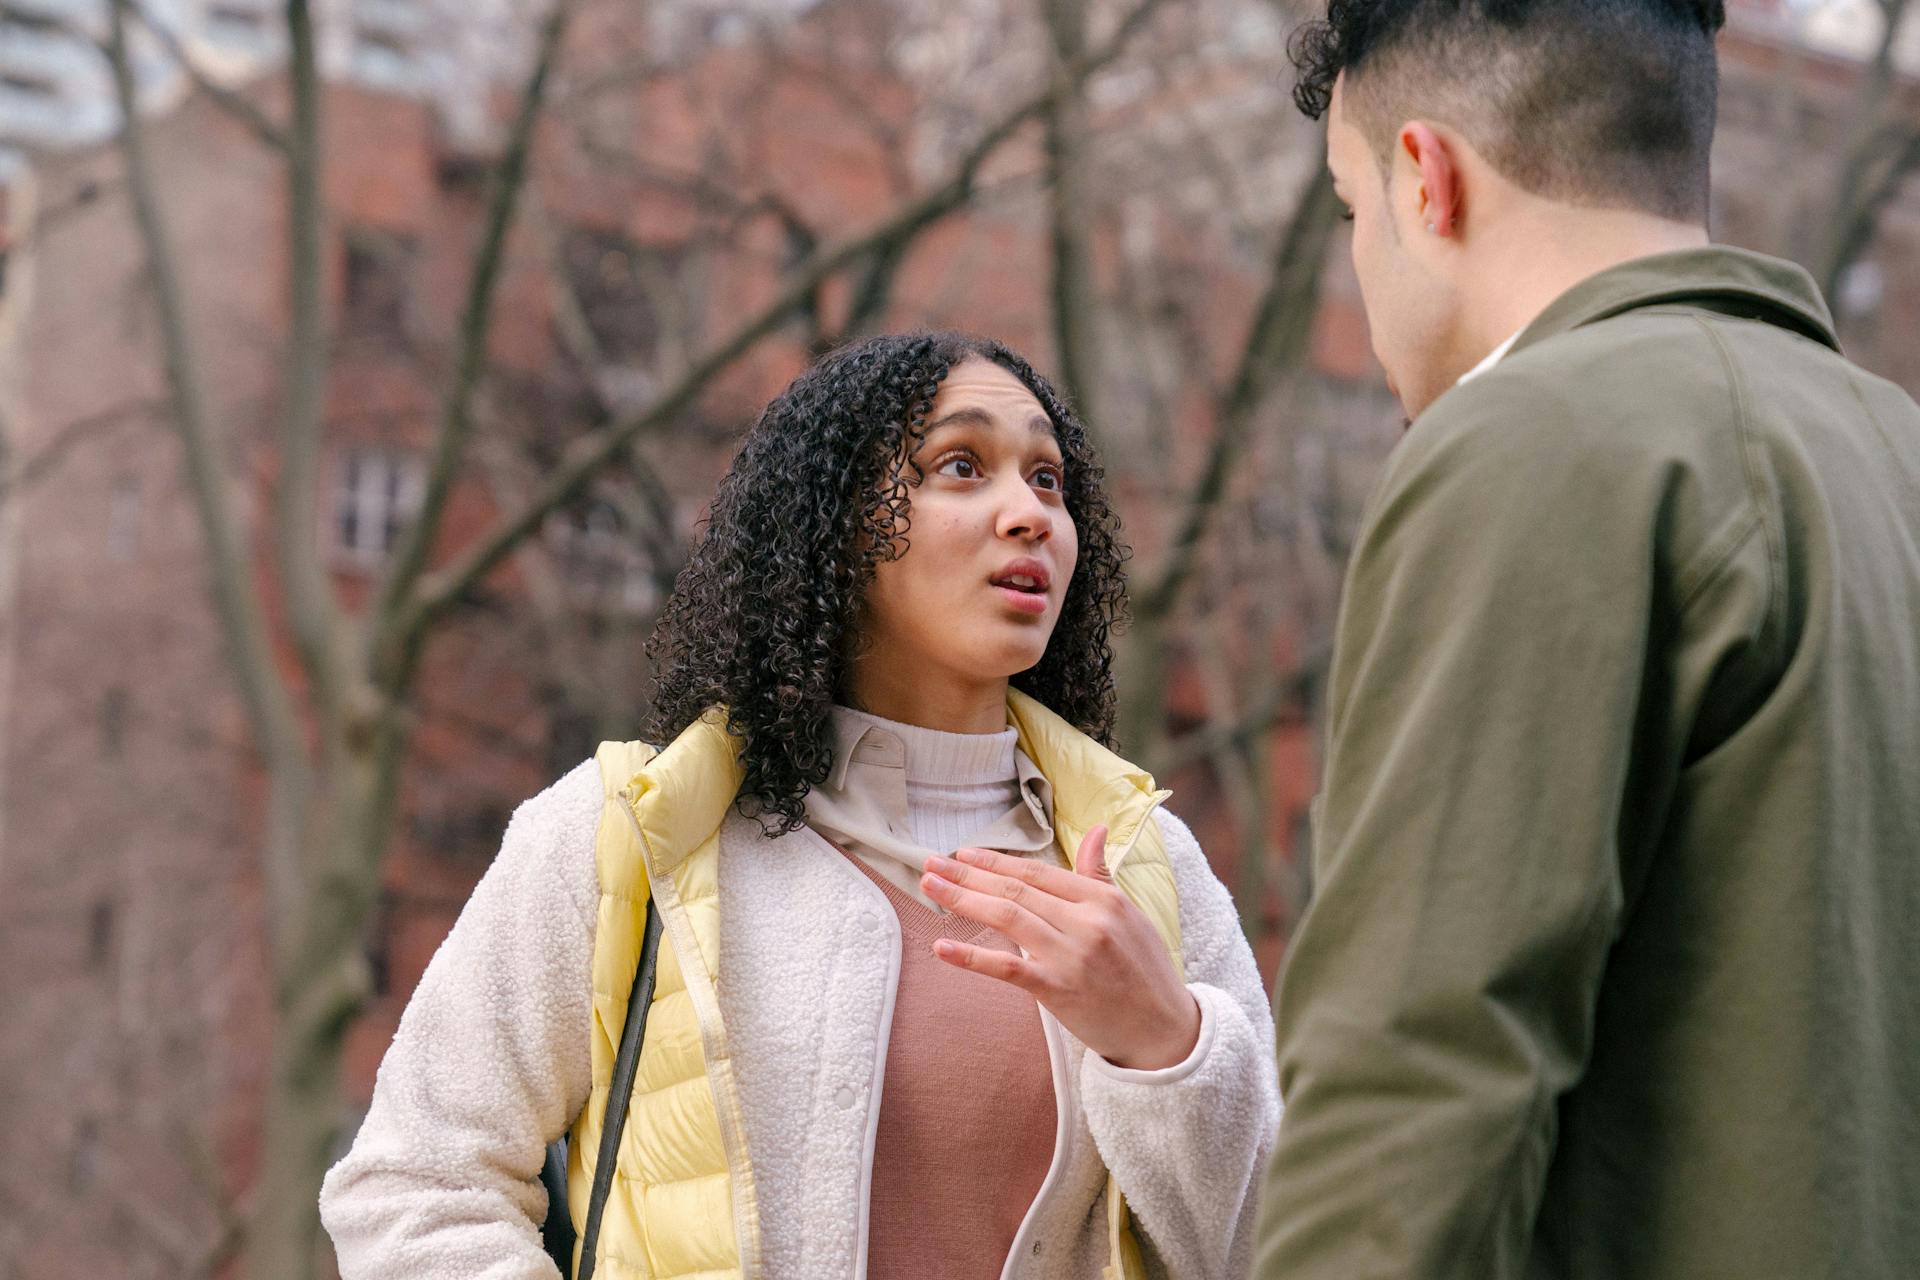 A couple having a heated discussion | Source: Pexels